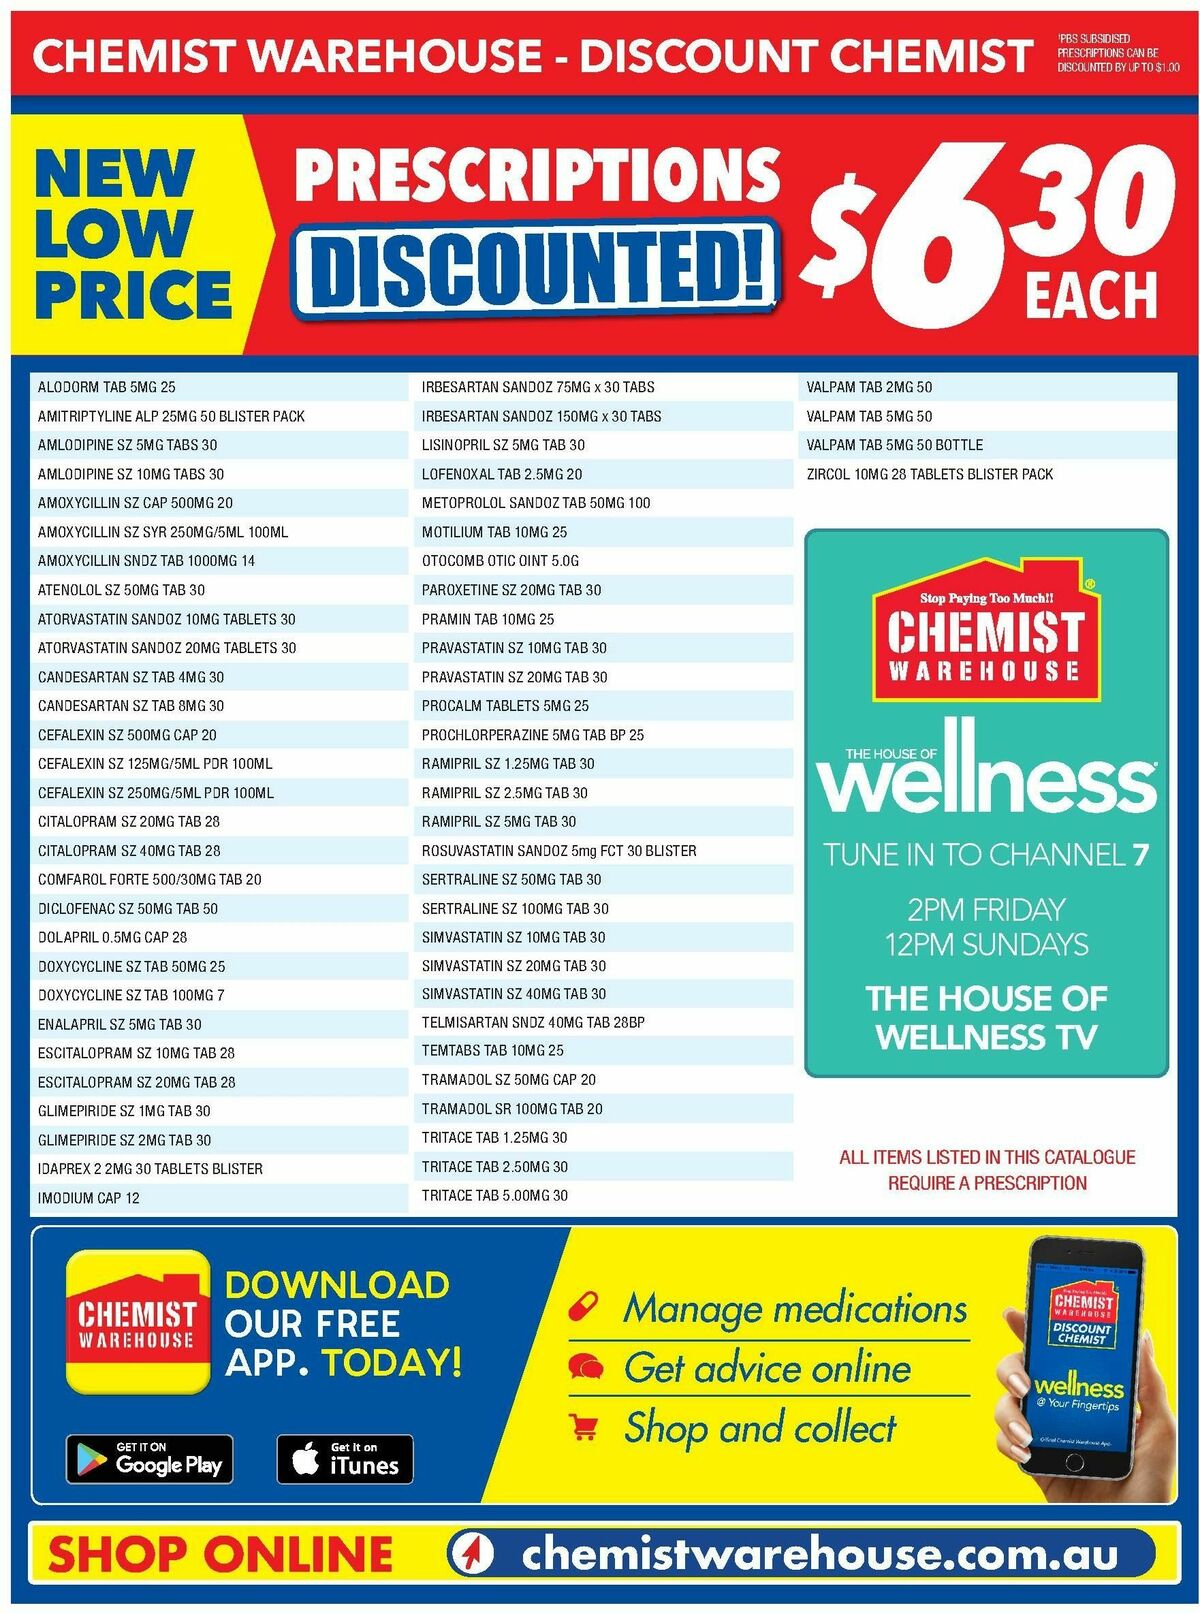 Chemist Warehouse Discounted! Prescriptions Catalogues from 22 November